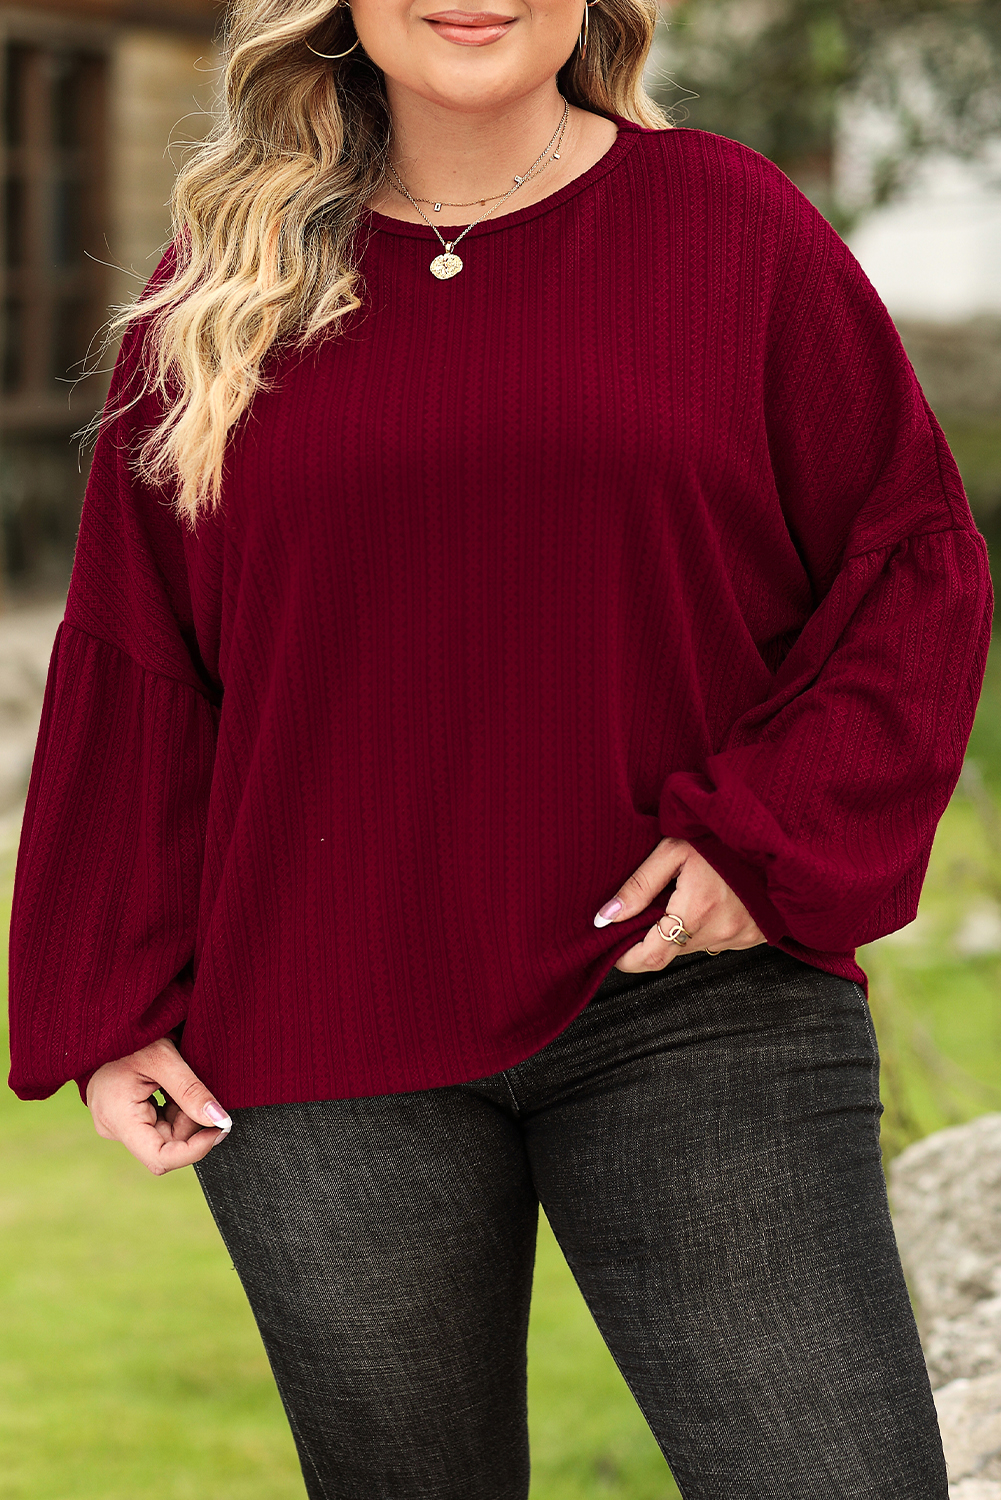 Shewin Wholesale Women Clothing Ruby Plus Size BALLOON Sleeve Textured Knit Top